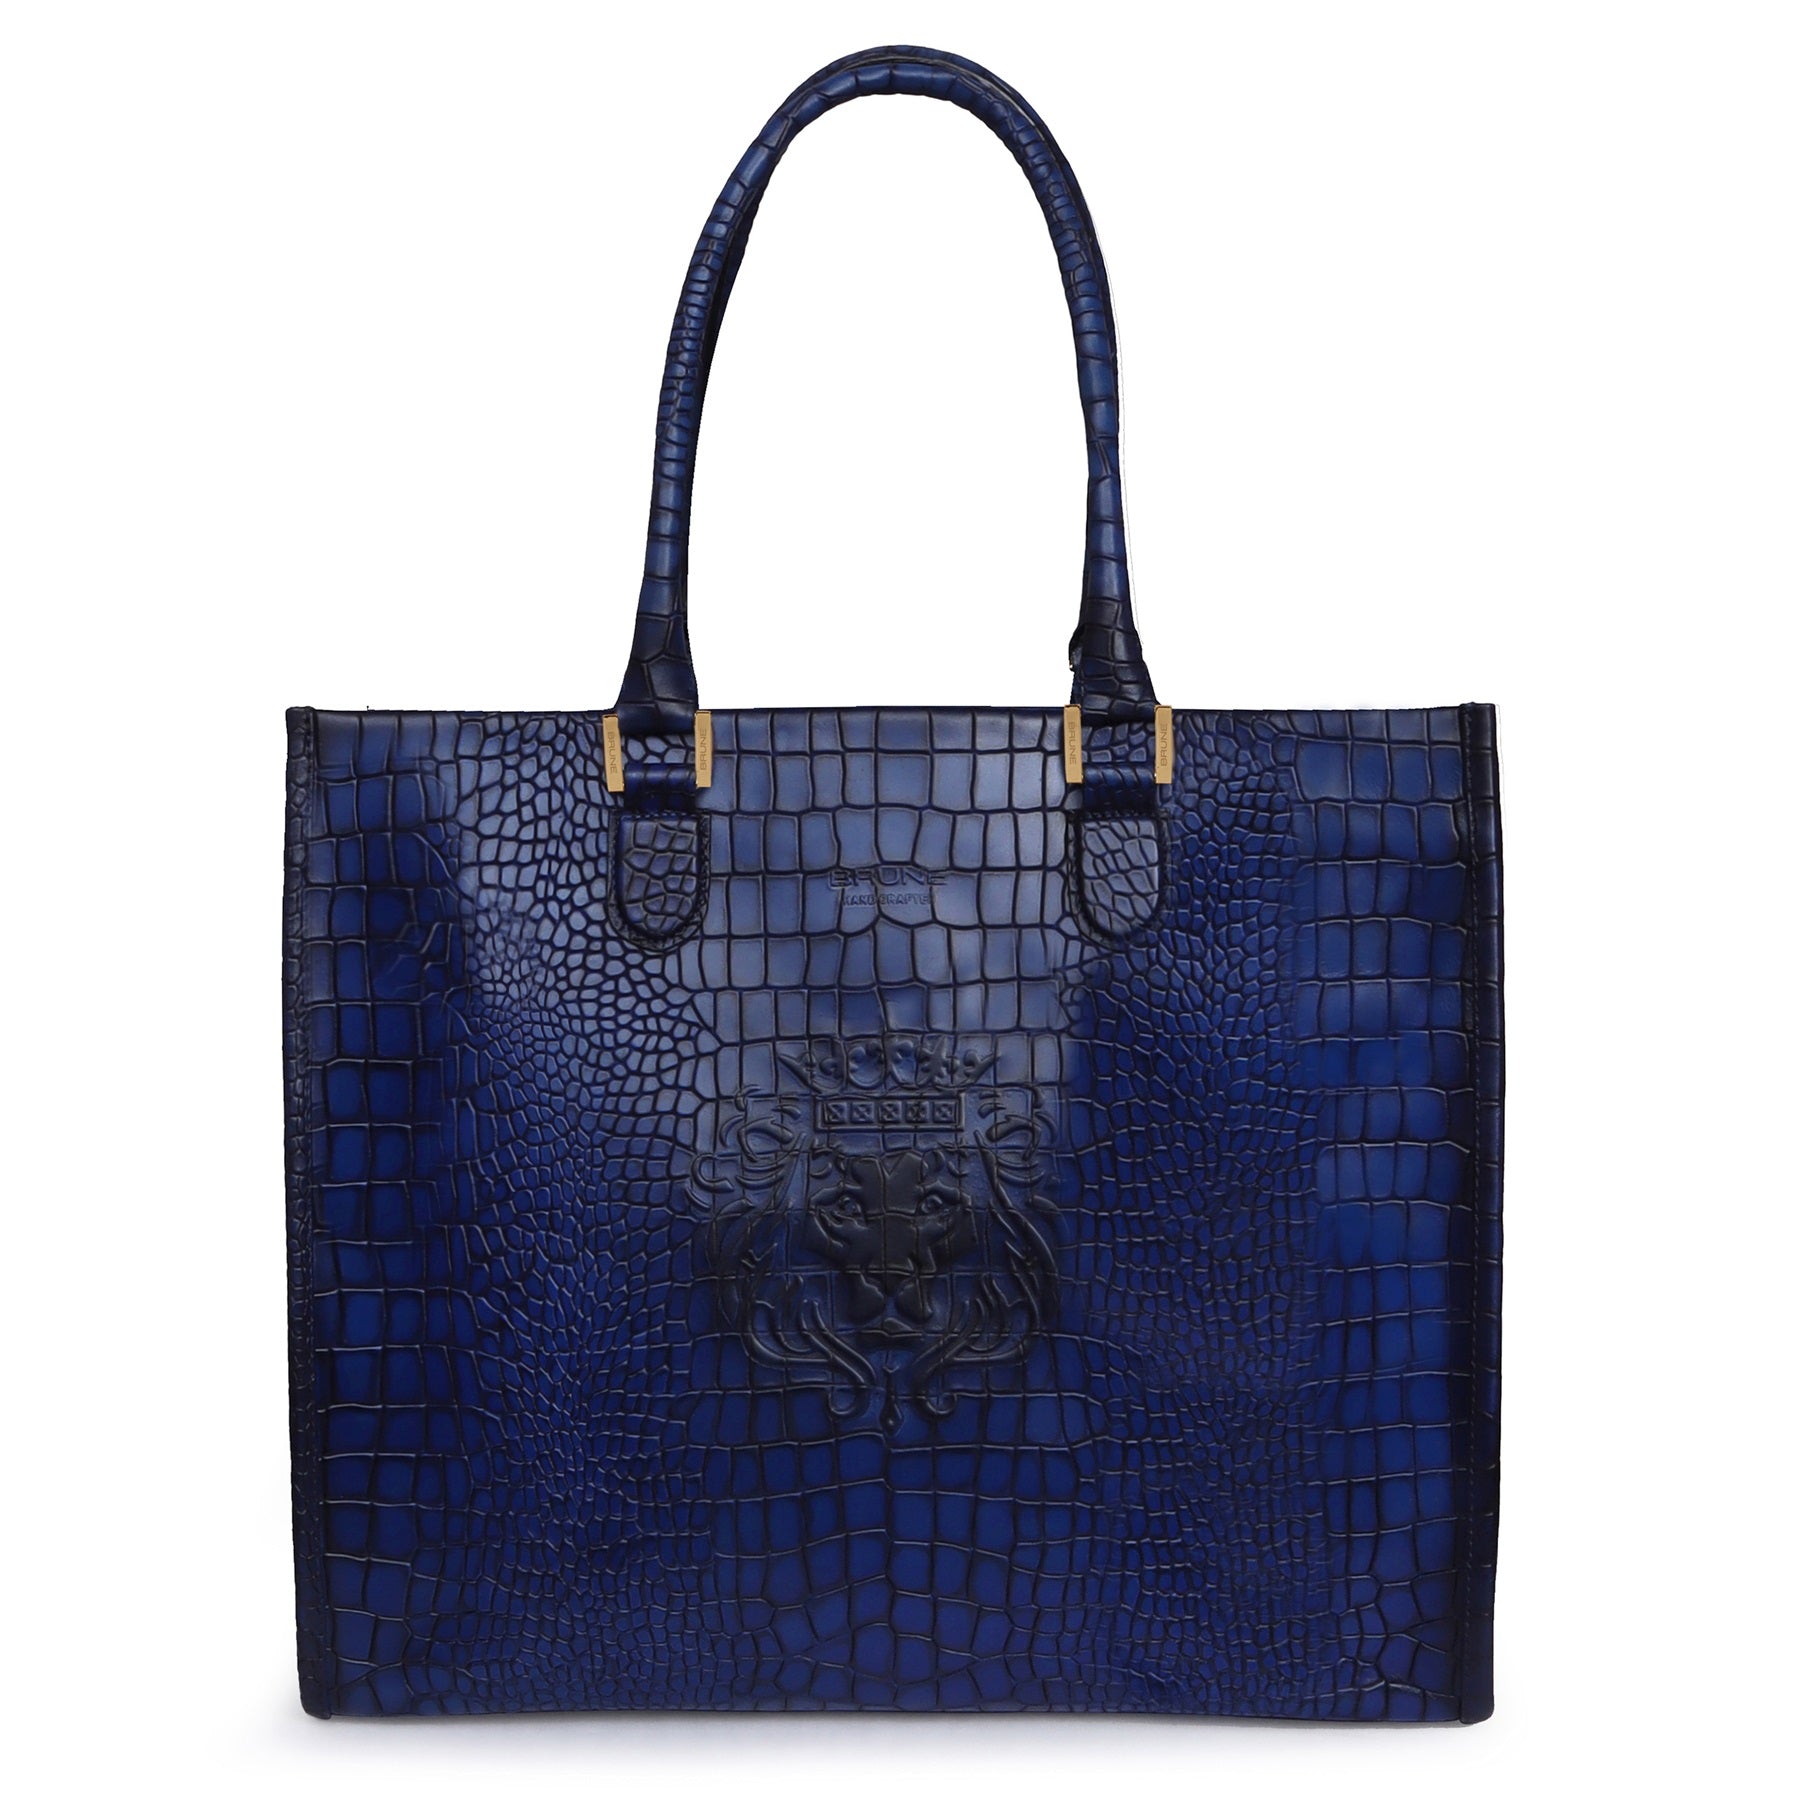 Blue Large Hand Bag in Deep Cut Croco Textured Leather